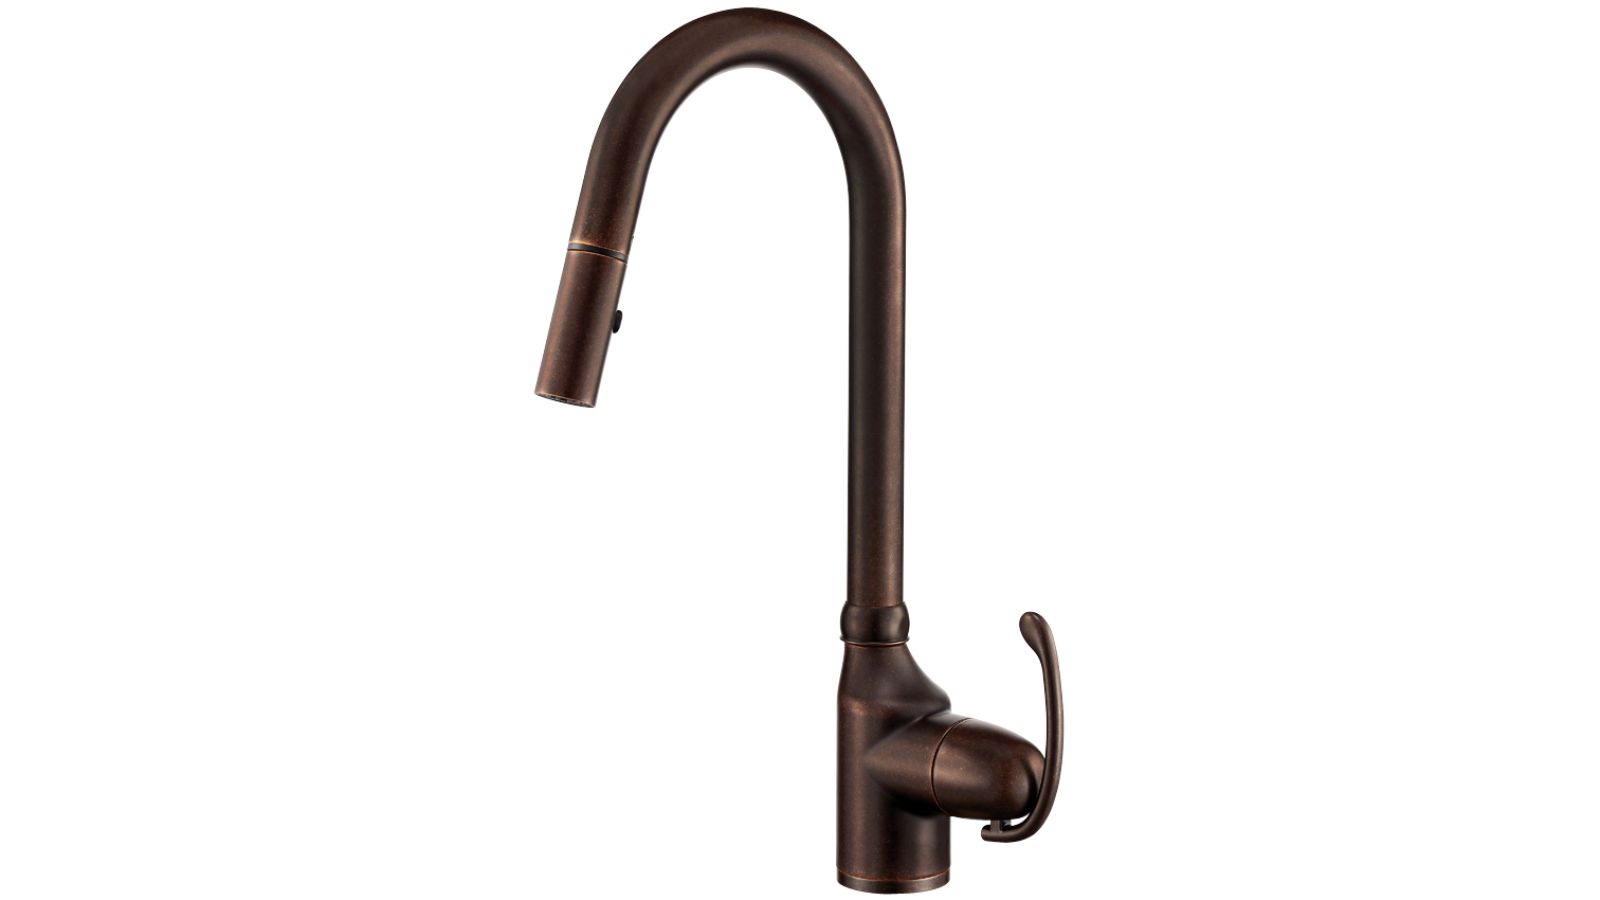 Anu Single Handle Pull-Down Kitchen Faucet